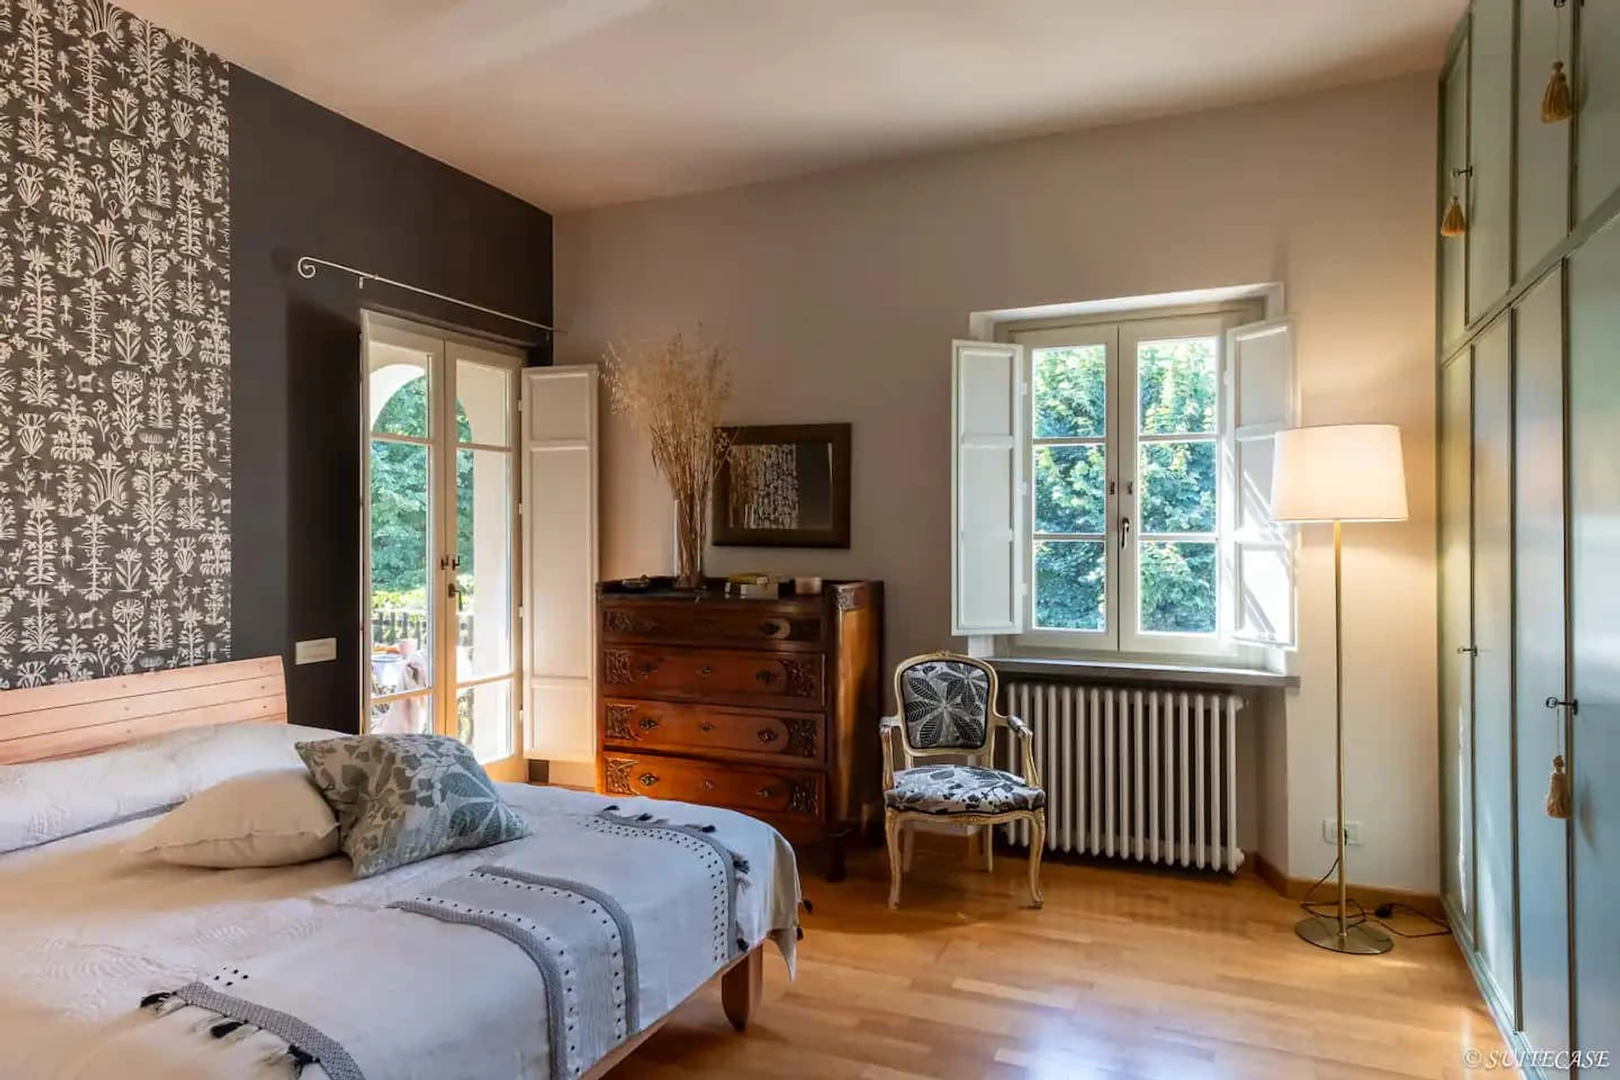 Accommodation with 3 bedrooms in Lucca